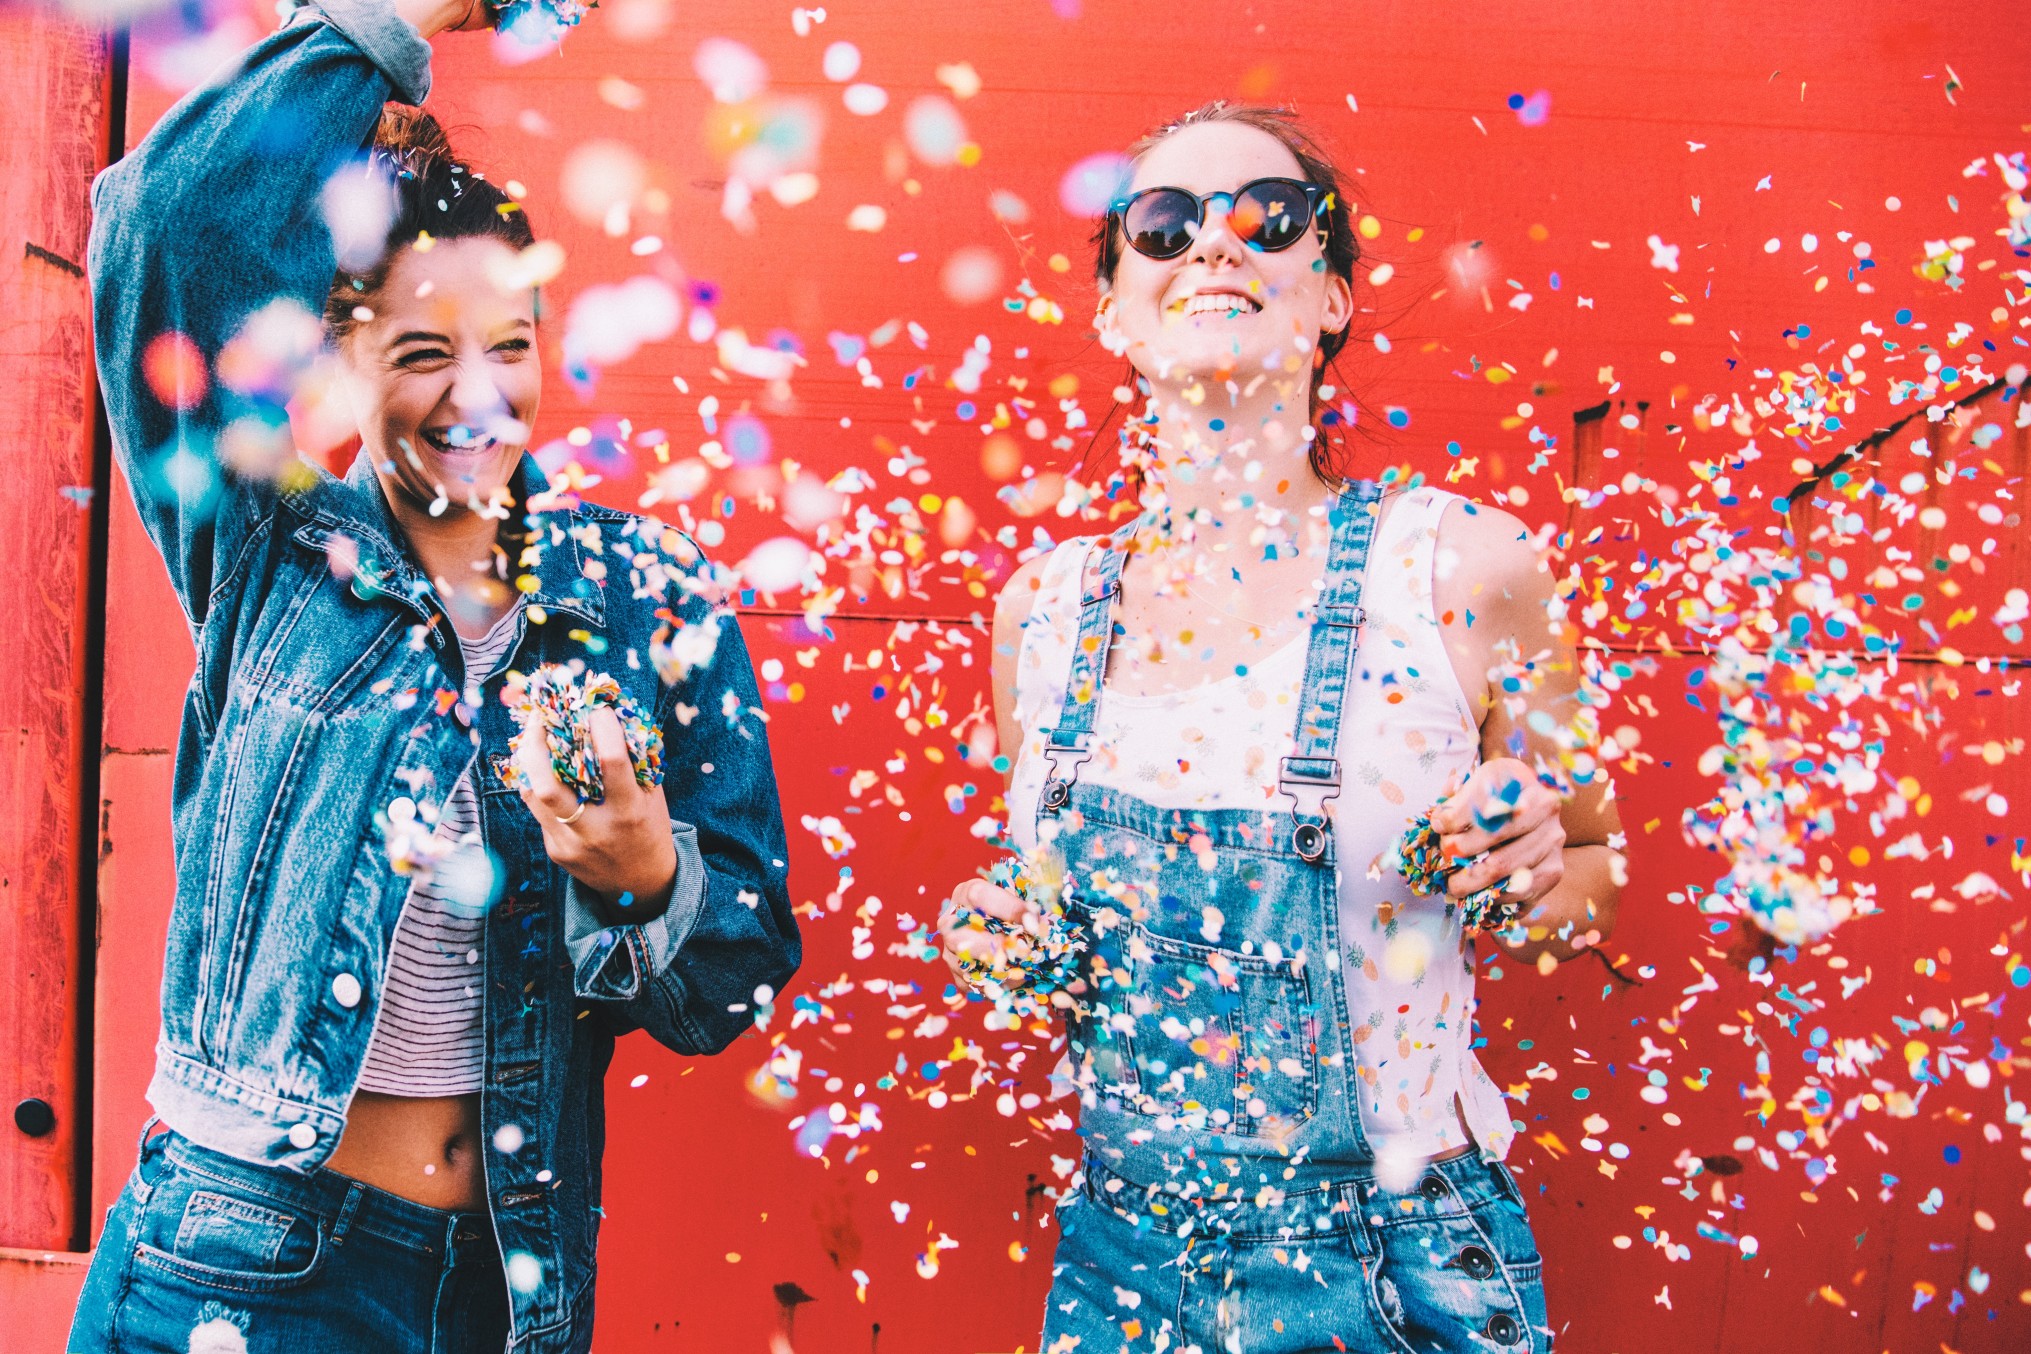 red-smiling-party-confetti-colourful-vibrant-friends-happy-celebrate-laughing-girl-friend_t20_mowYd8